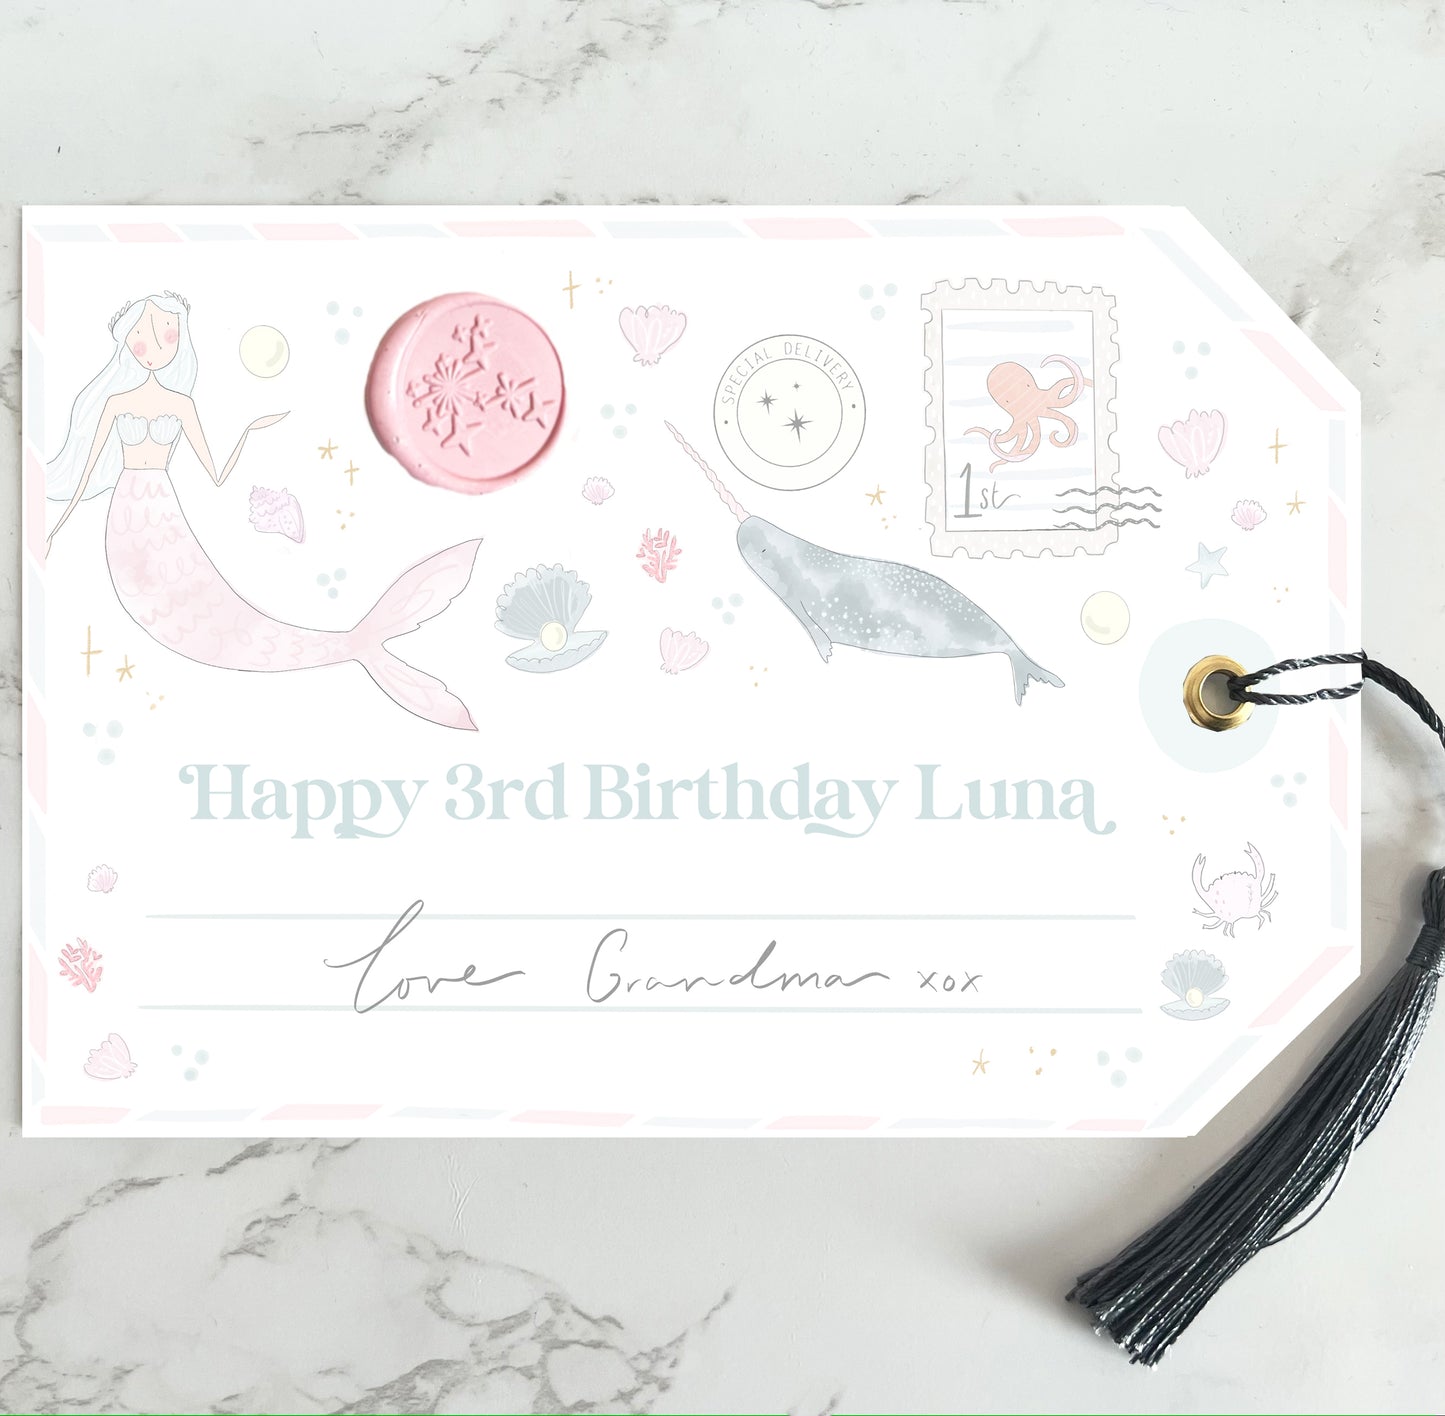 Giant Mermaid personalised birthday gift tag gold foil with silk navy tassel